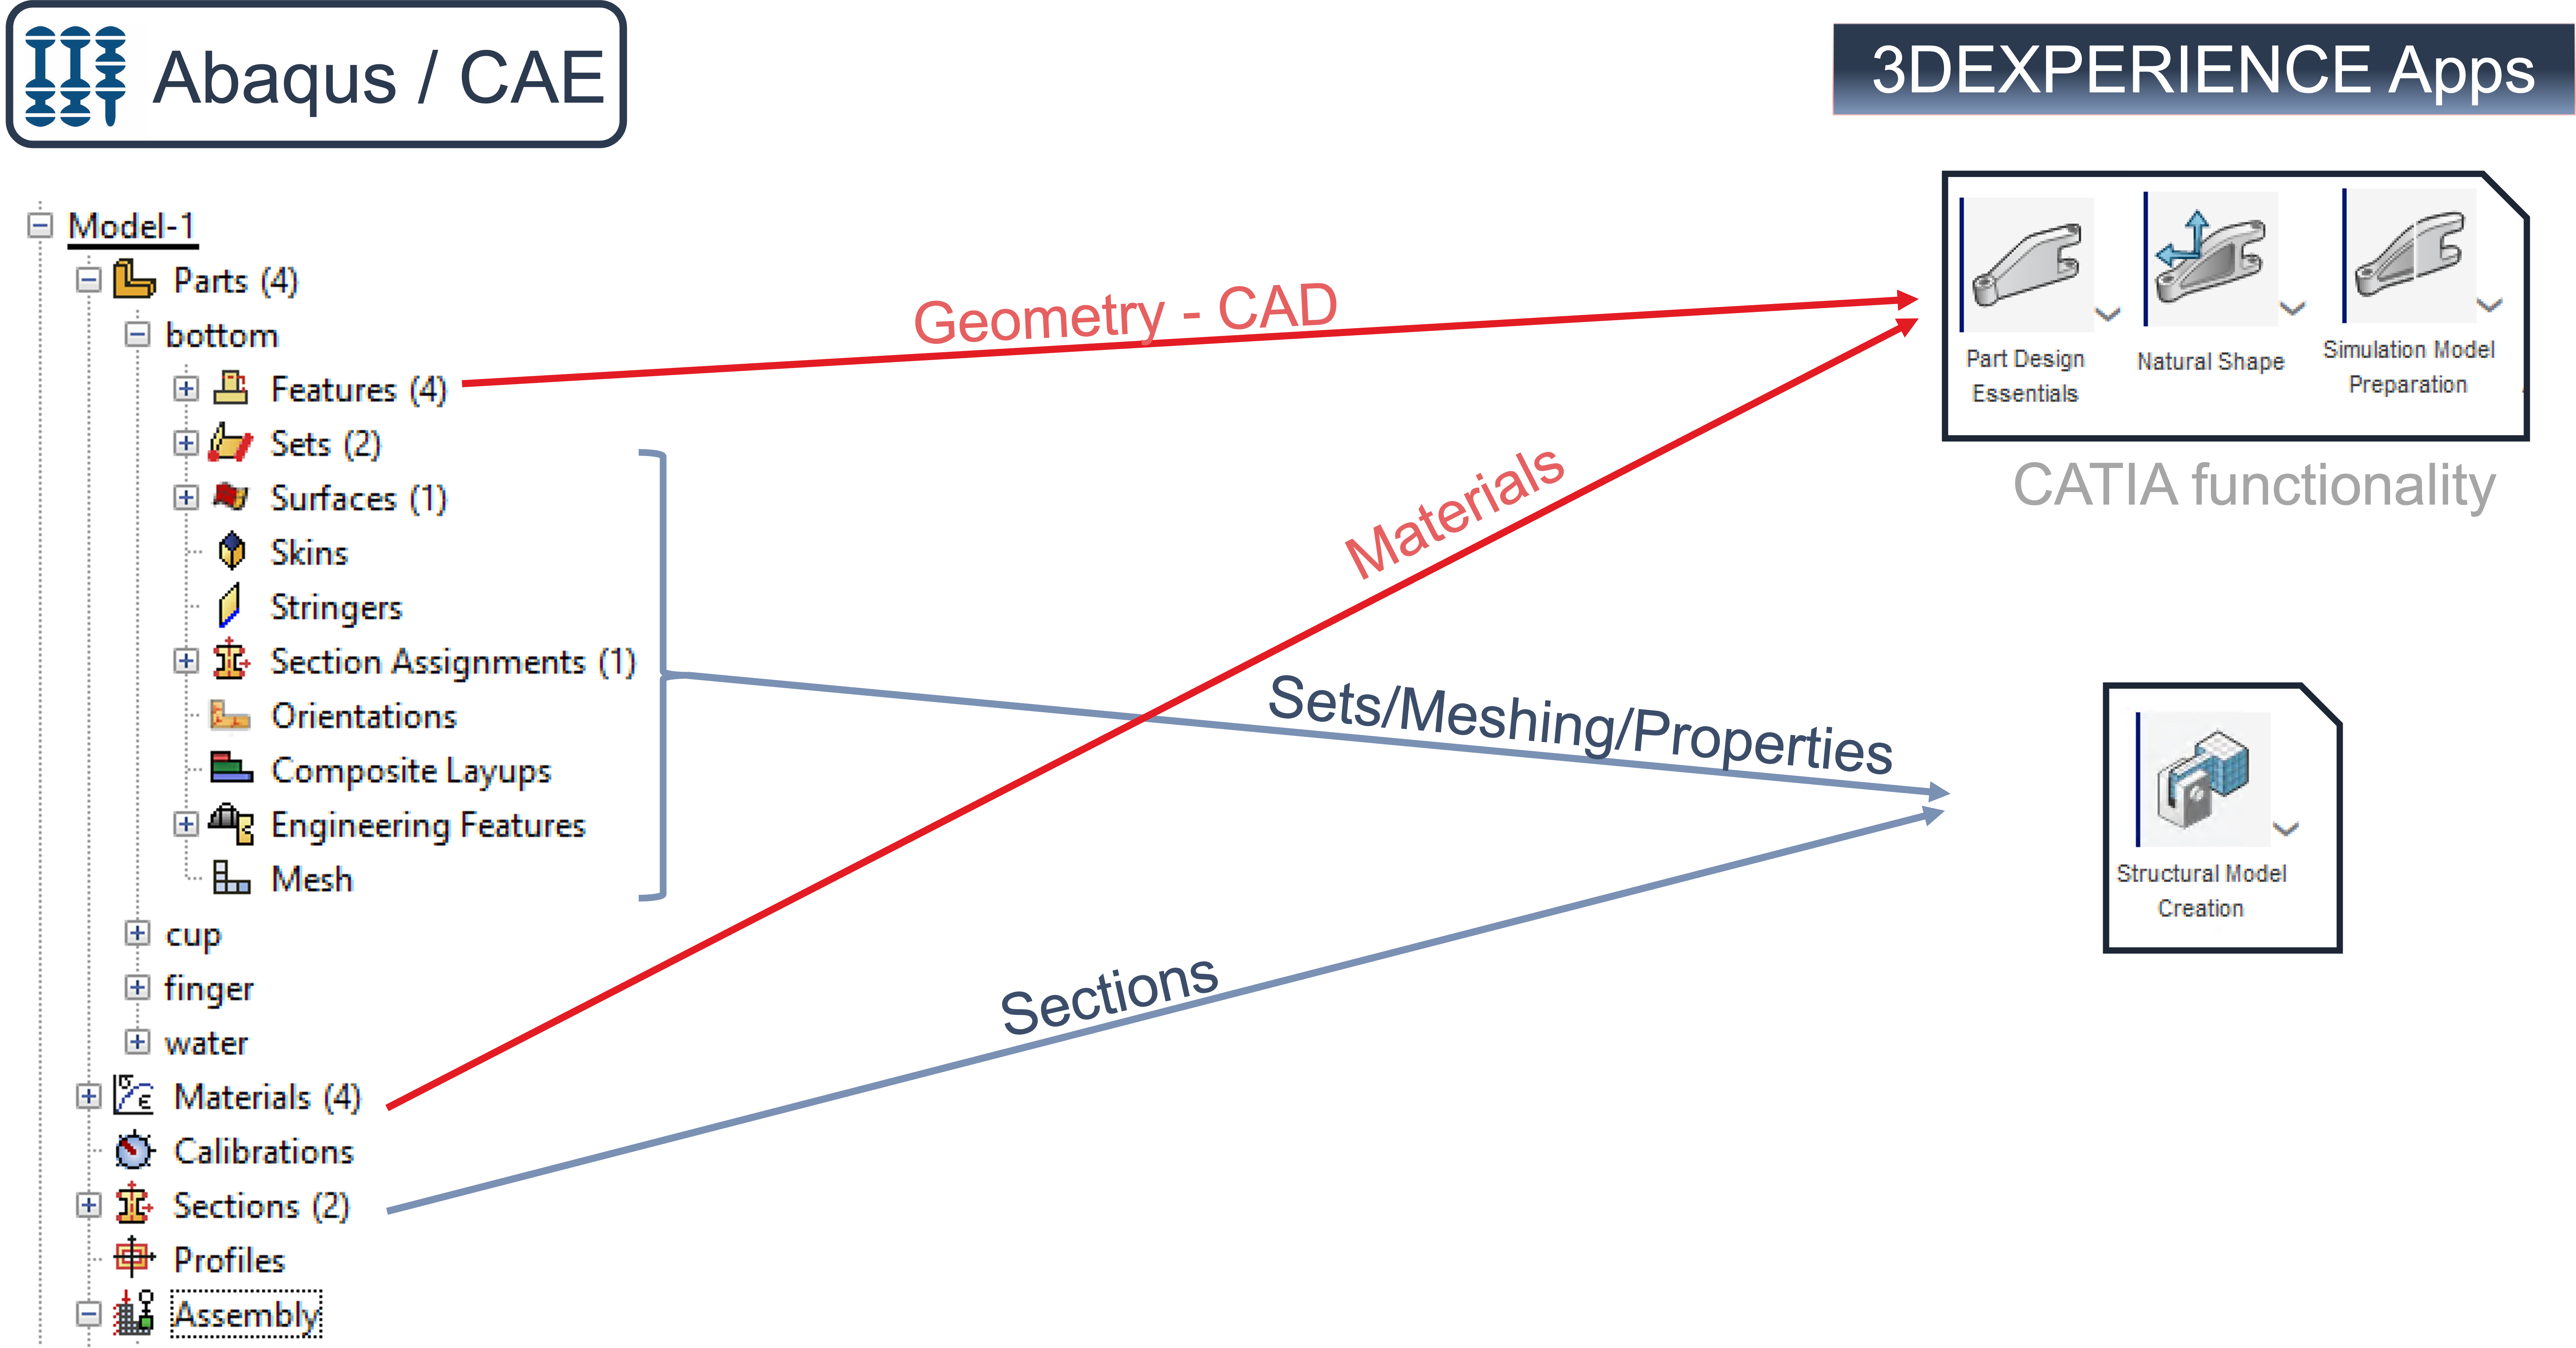 From Abaqus To §DEXPERIENCE mapping Parts